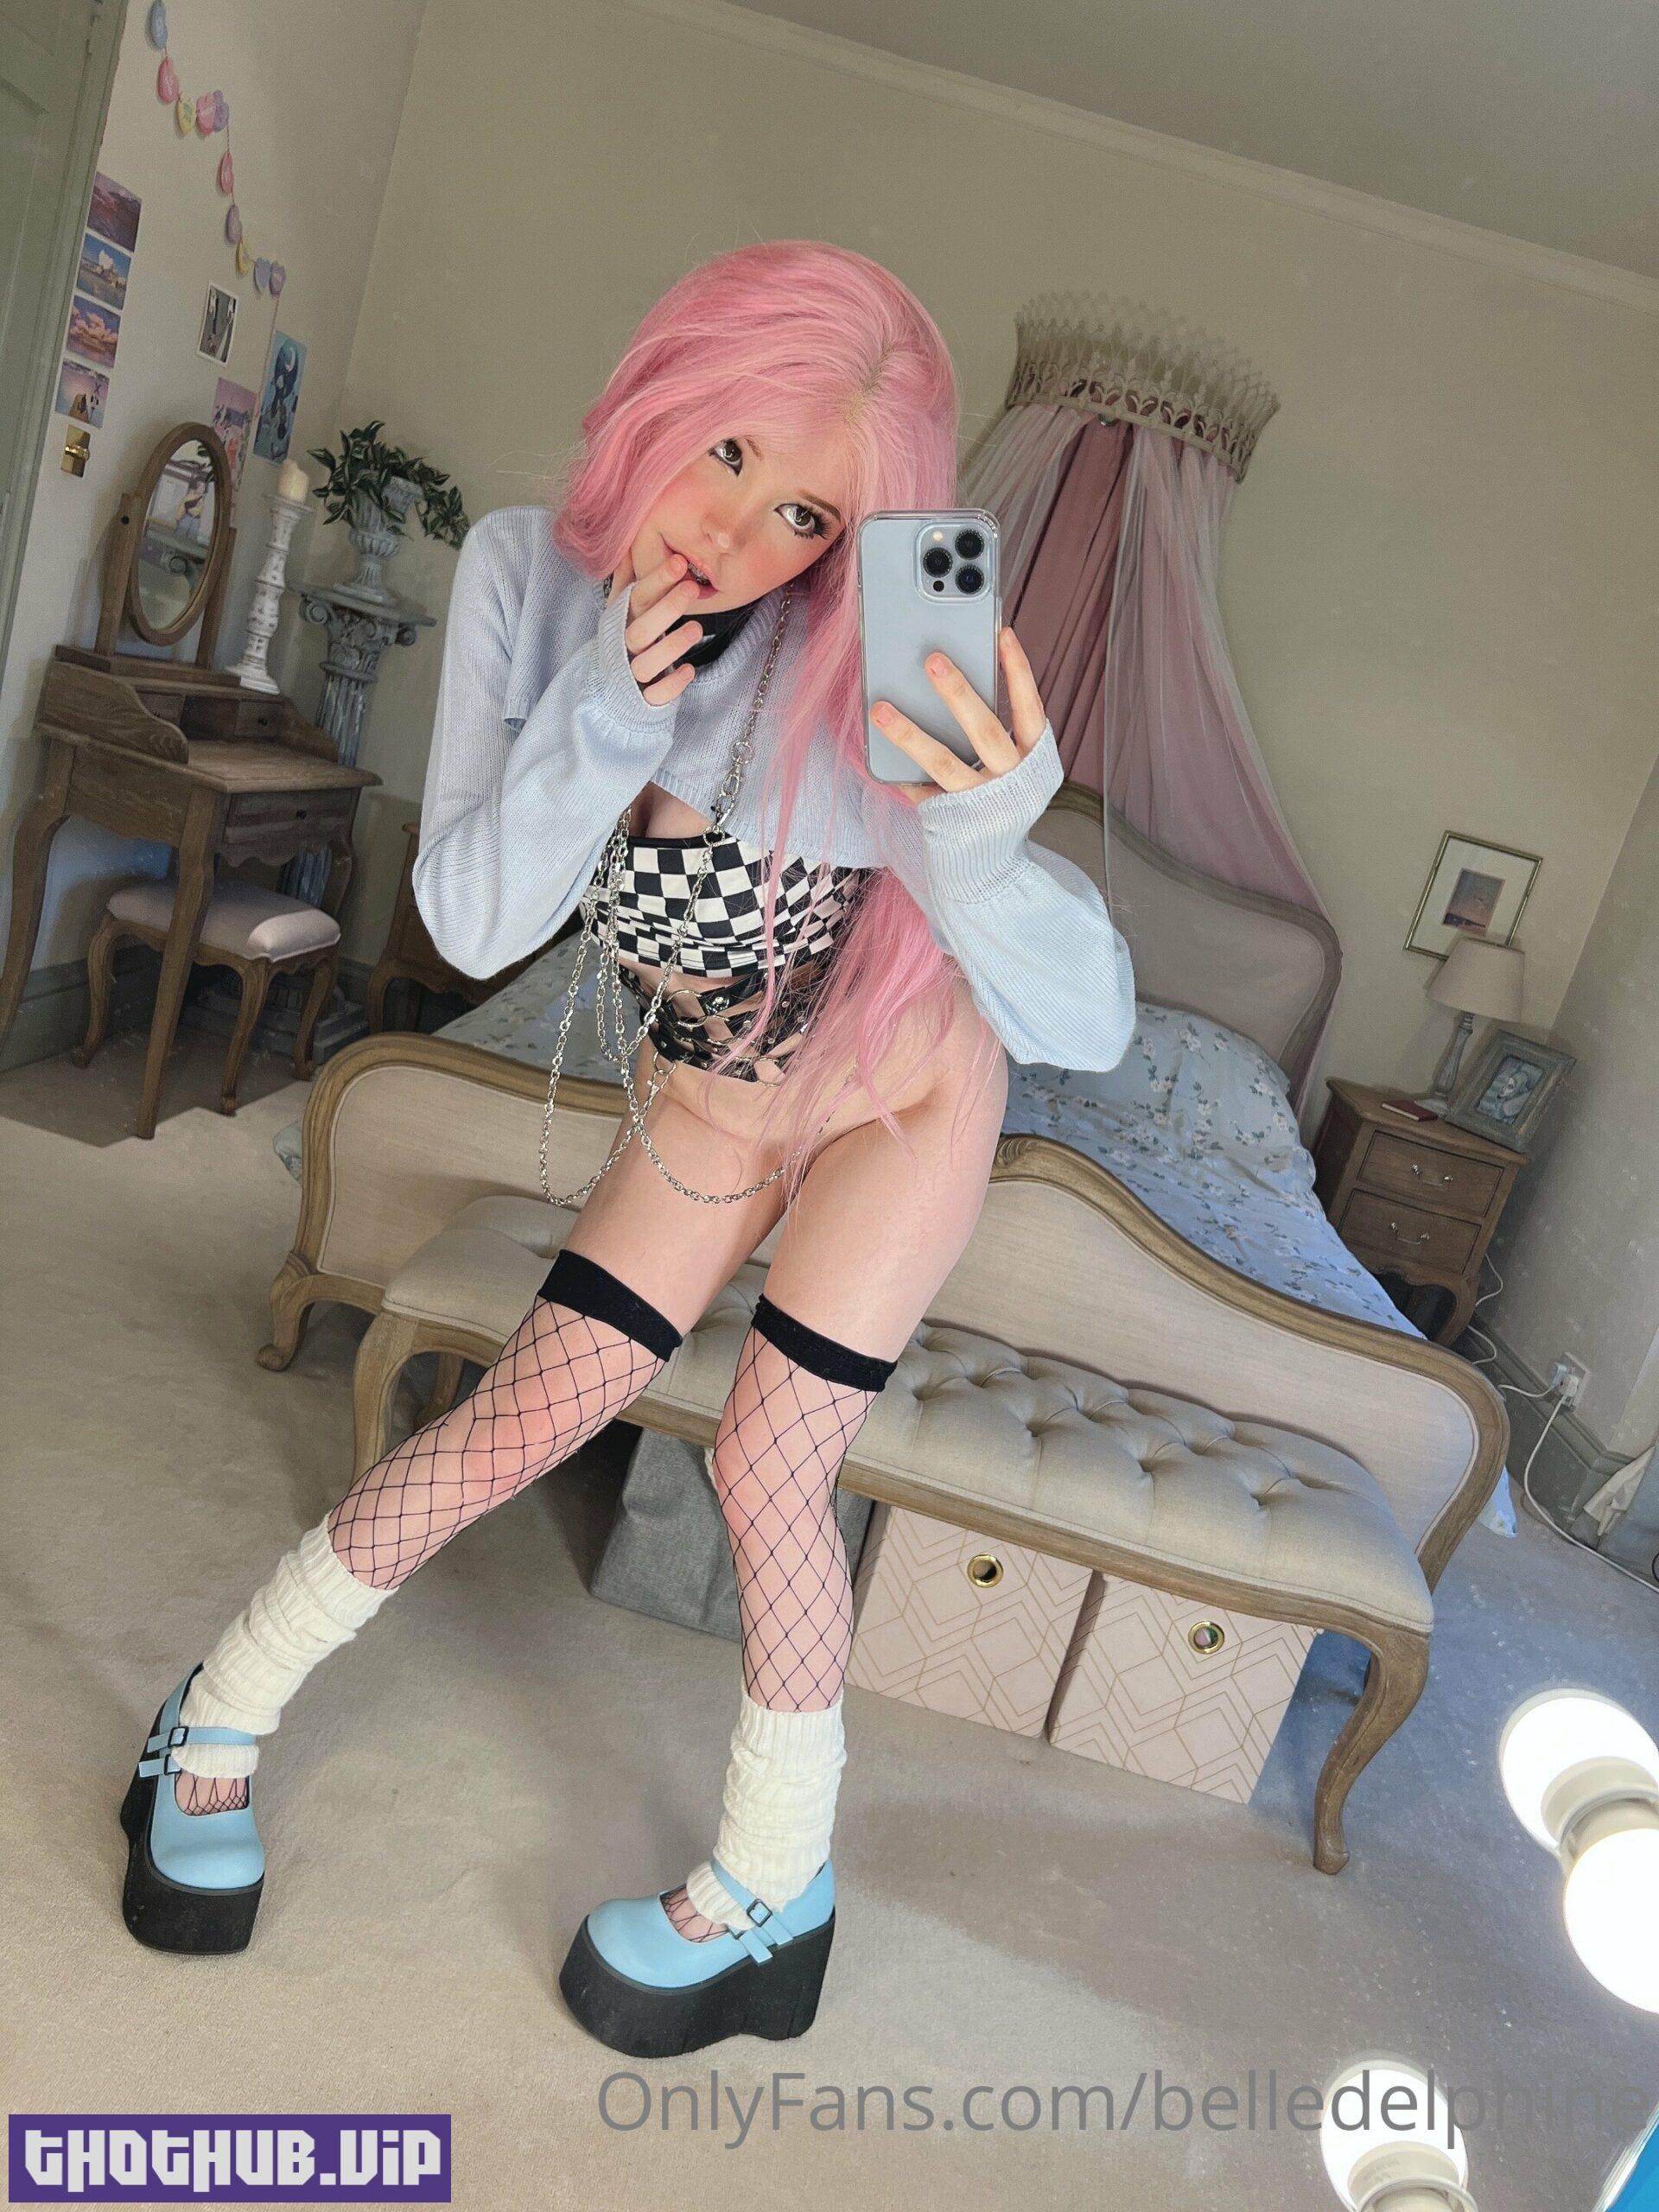 1667578898 365 Top Naked Belle Delphine Nude Cafe Cosplay Porn 2022